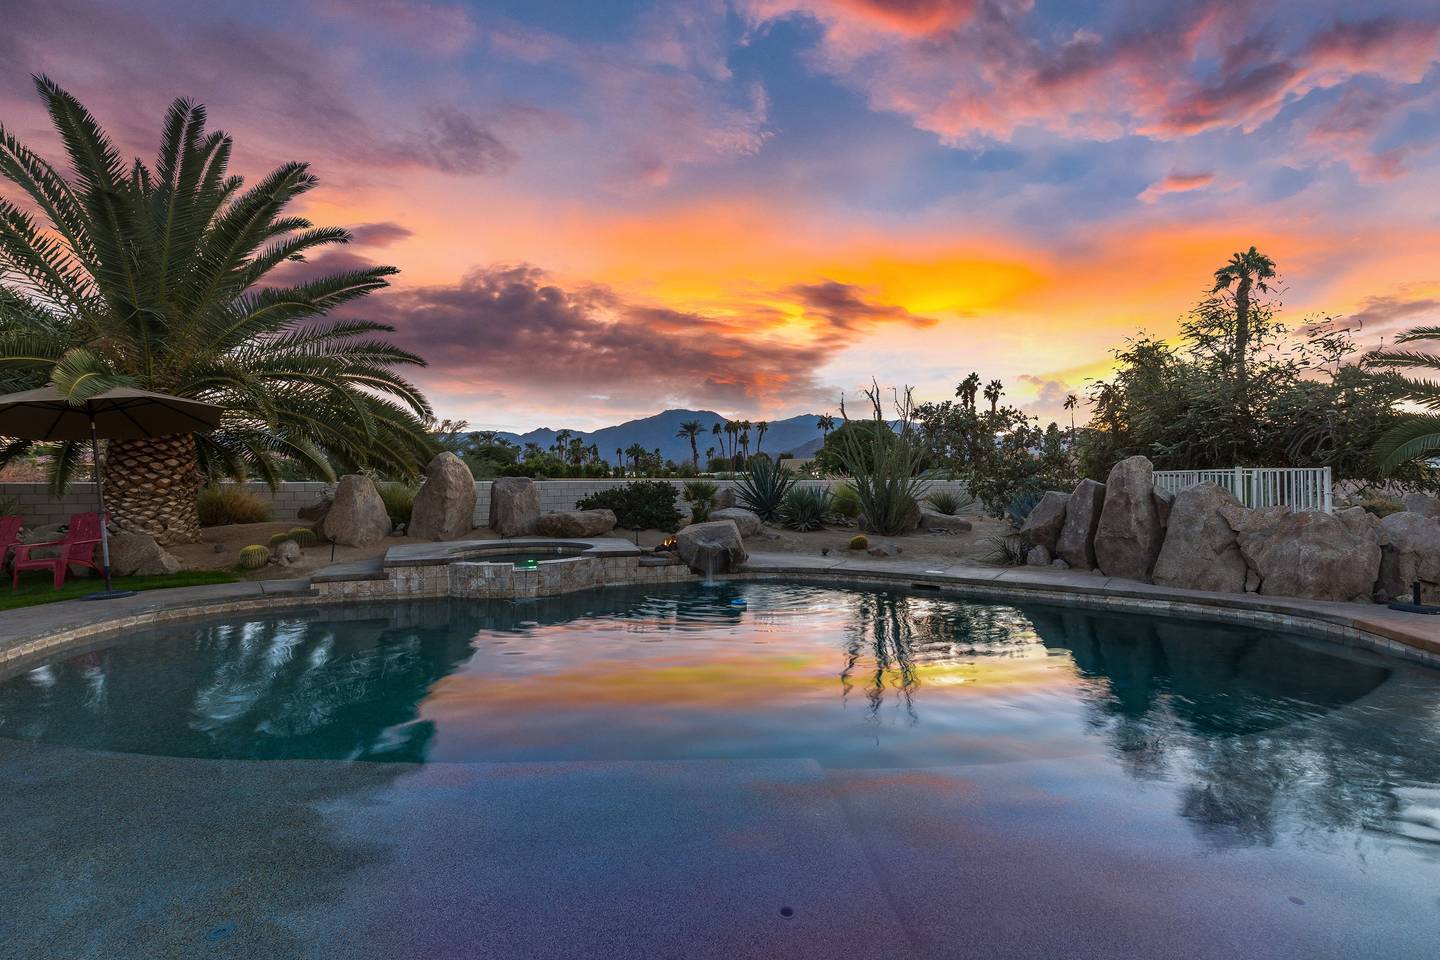 mansion with 23 bedrooms close to coachella festival airbnb